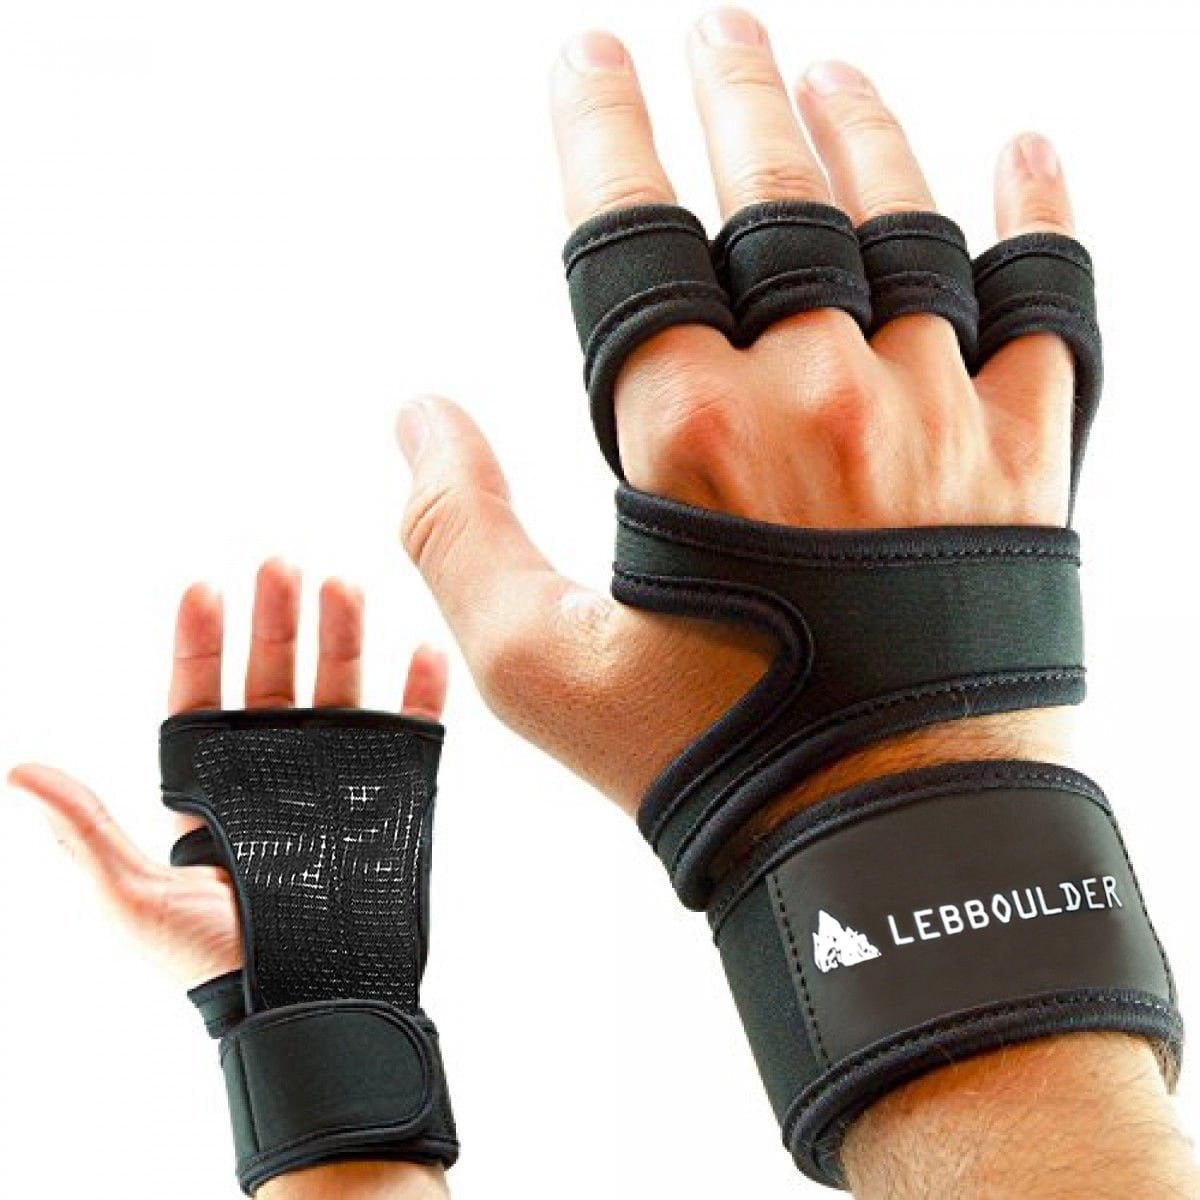 BODYBUILDING GLOVES GYM LEATHER TRAINING CROSSFIT EXERCISE WEIGHTLIFTING GLOVES 